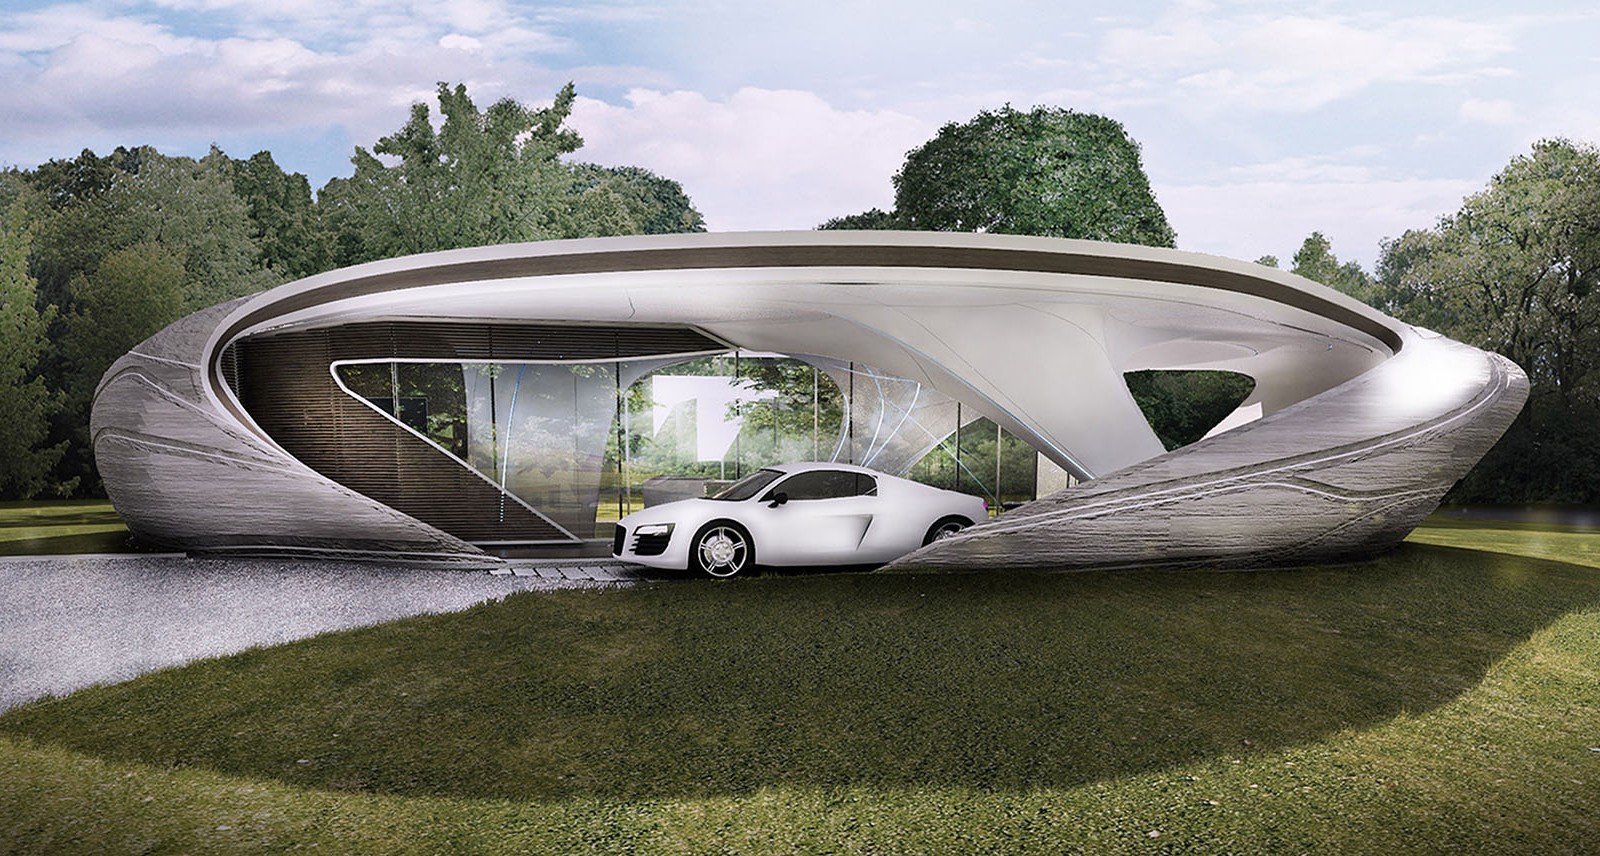 The World's First Freeform 3D-Printed House Makes the Jetsons Look Amish